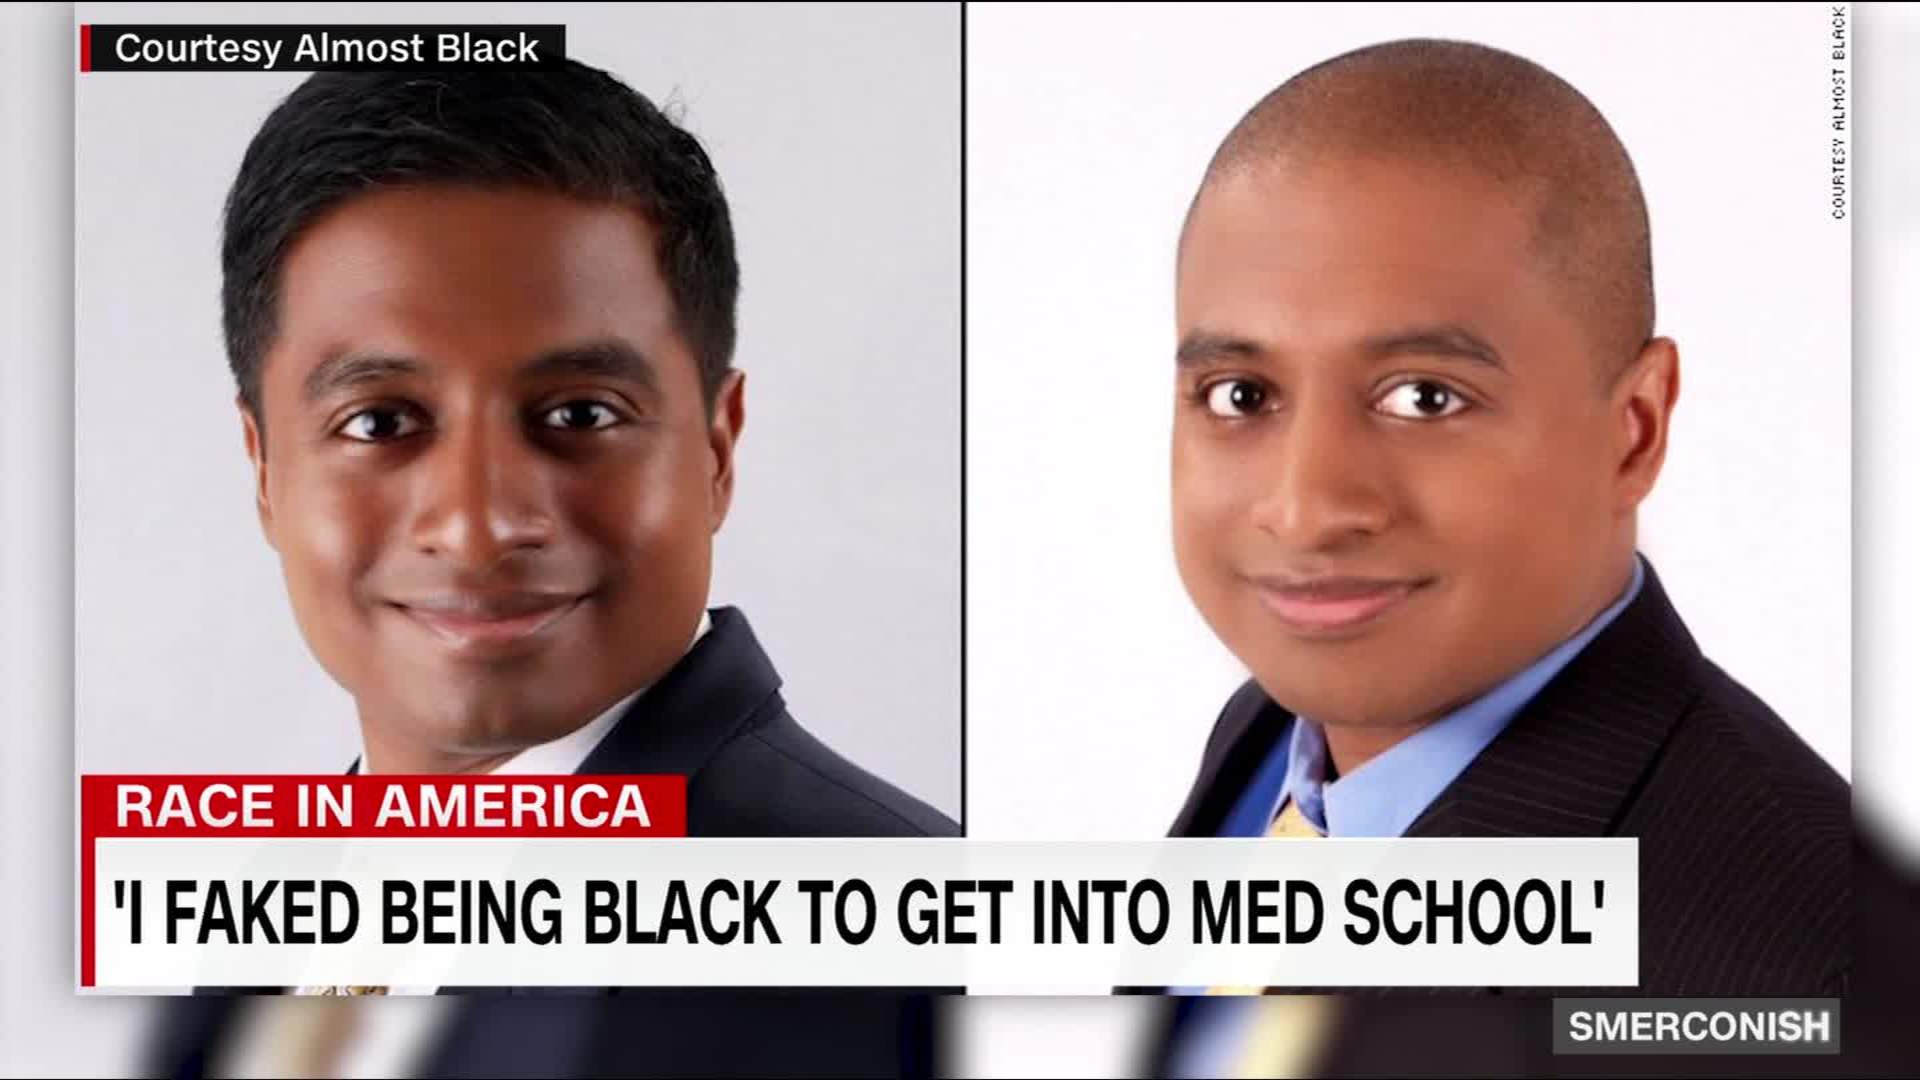 170805104651-i-faked-being-black-to-get-into-med-school-00002705.jpg